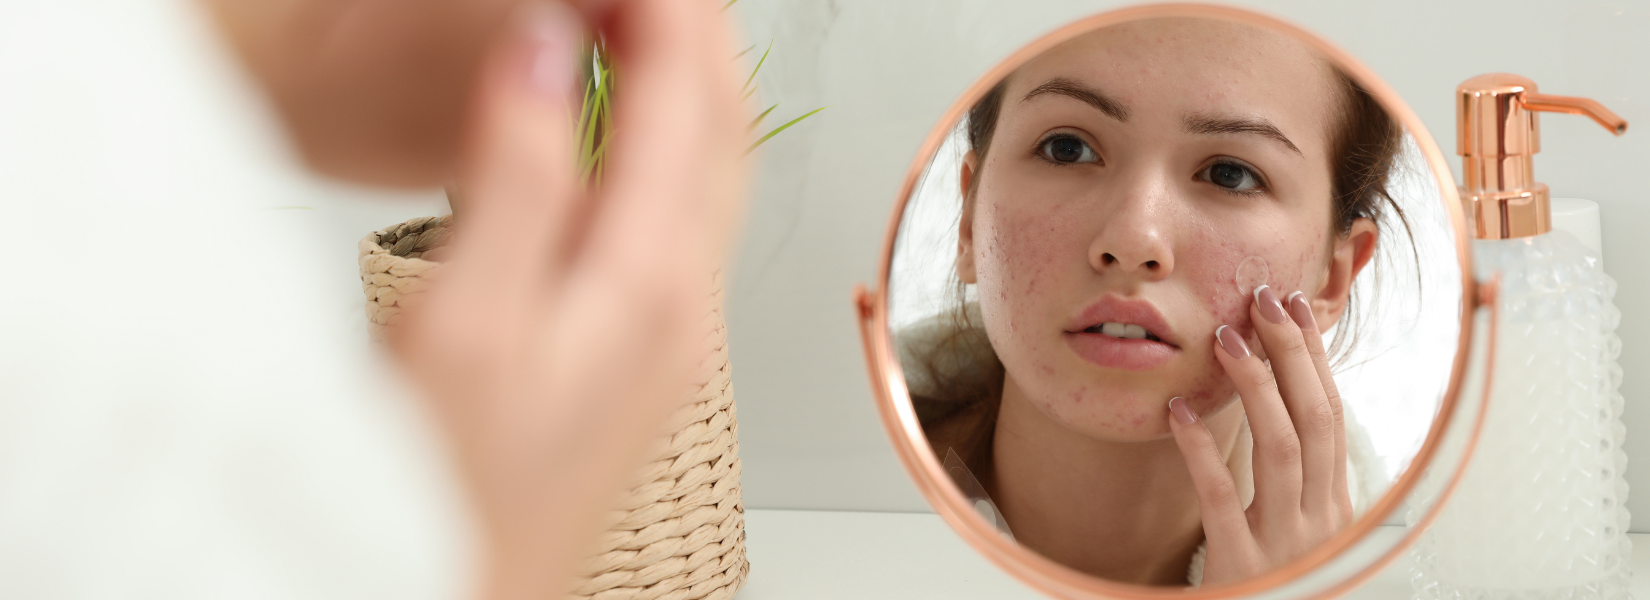 How to stop skin picking & heal breakouts